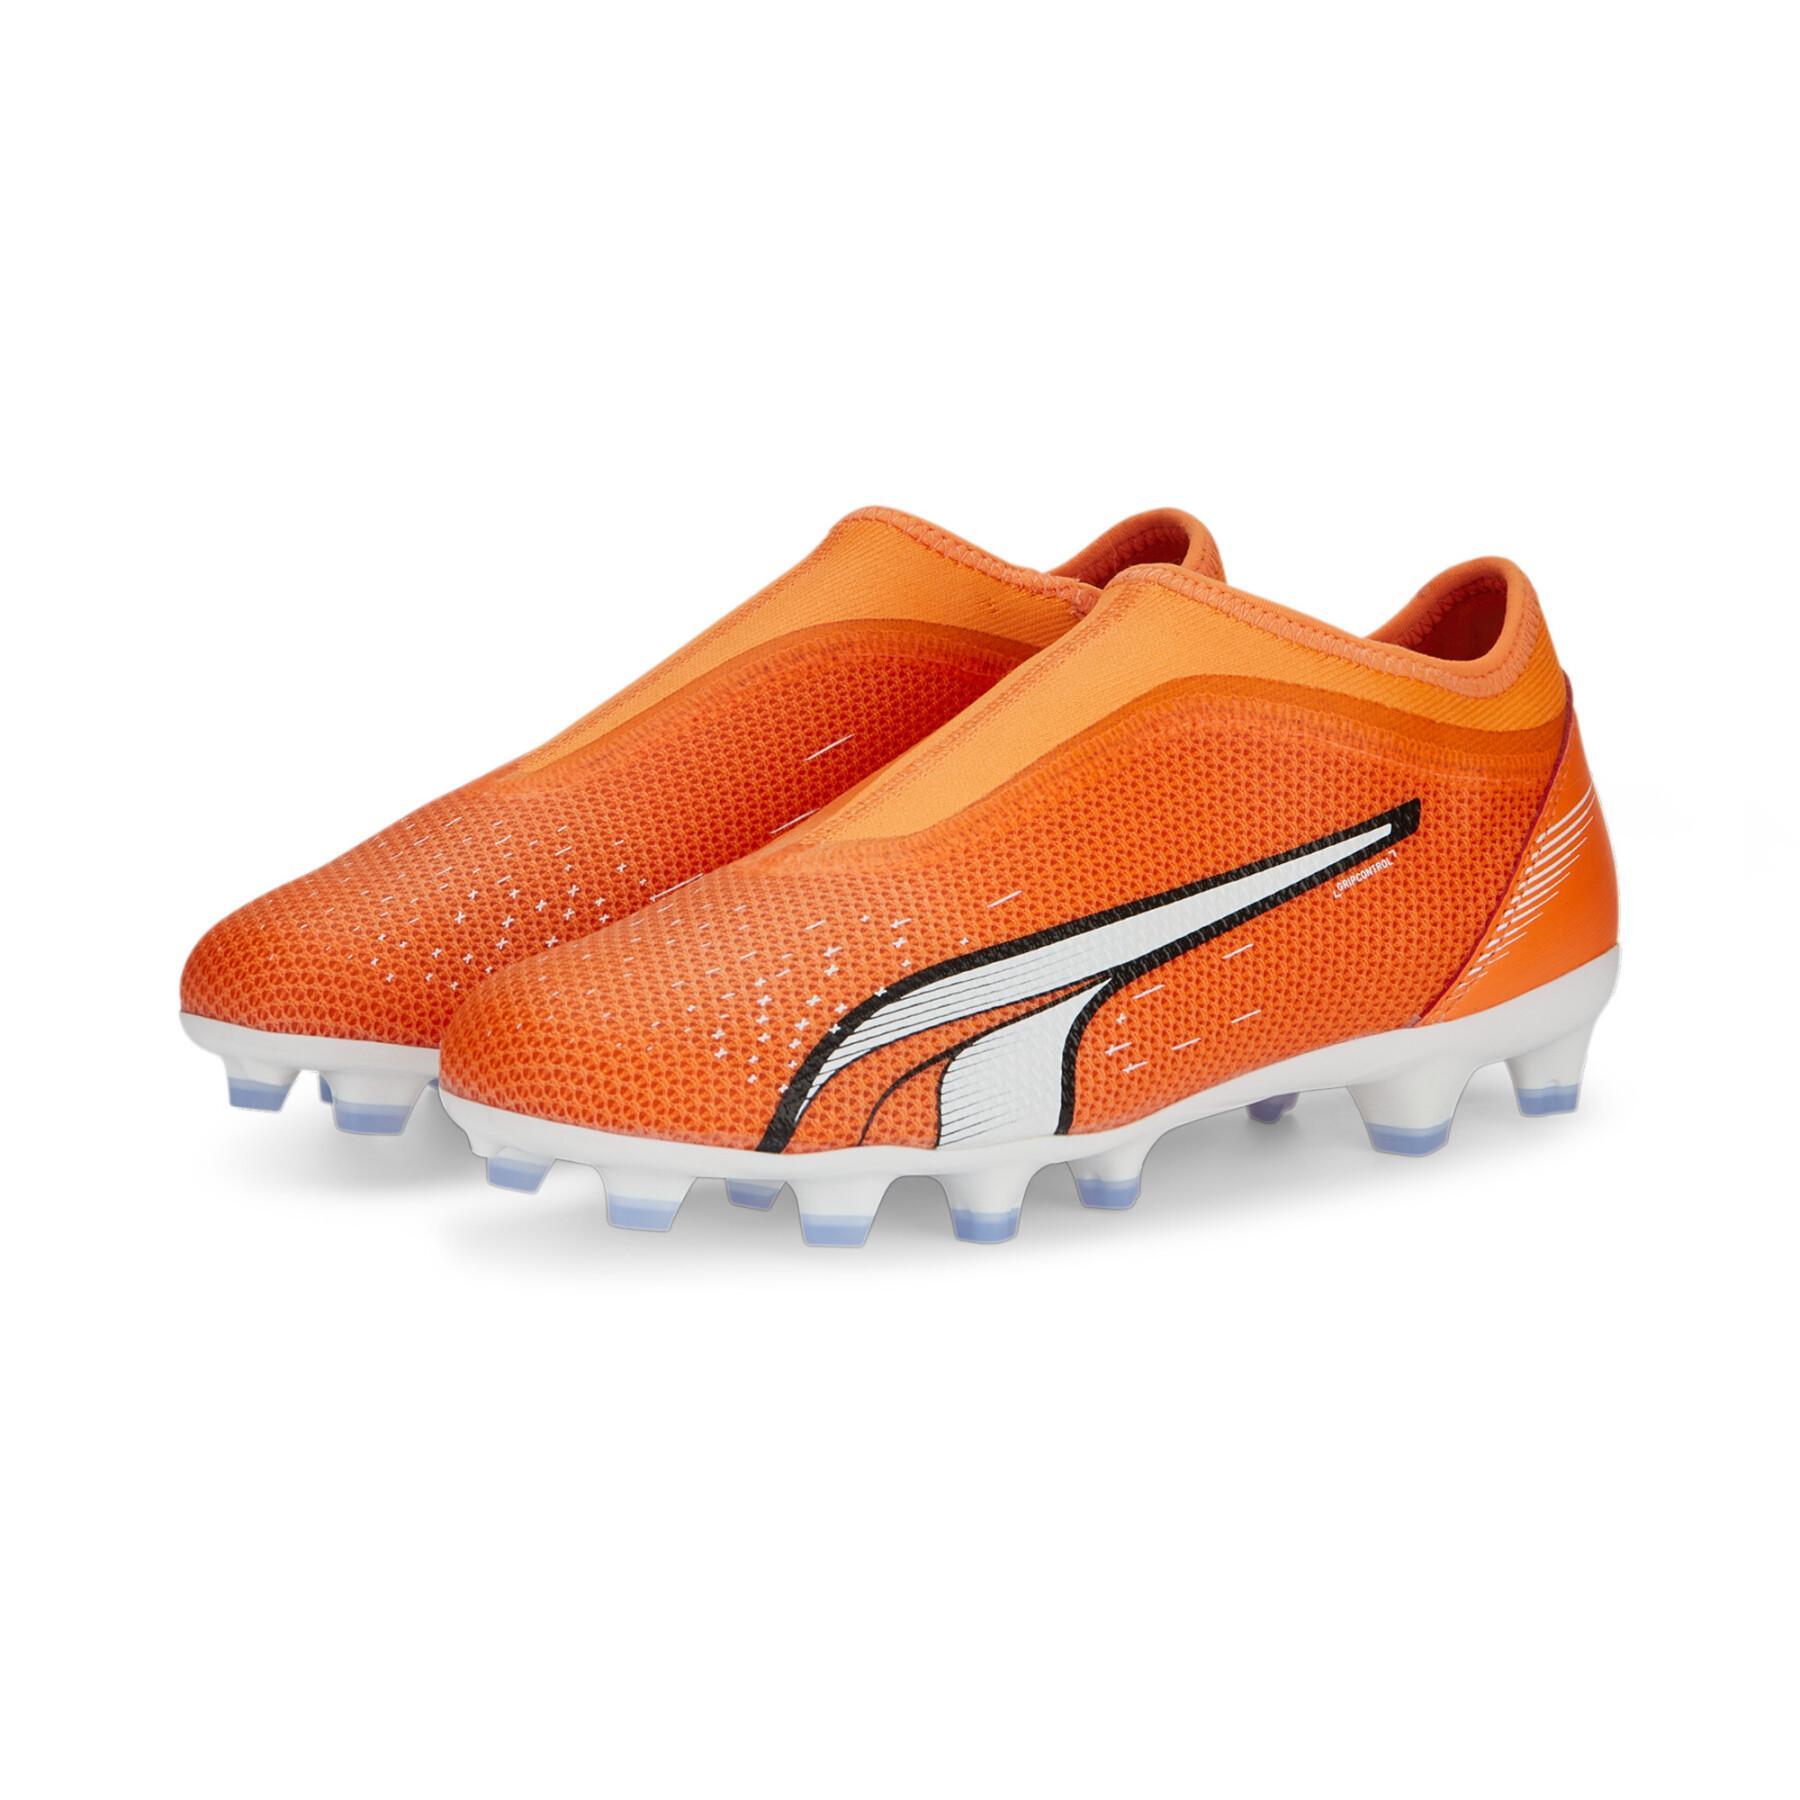 Soccer shoes without laces for children Puma Ultra Match FG/AG